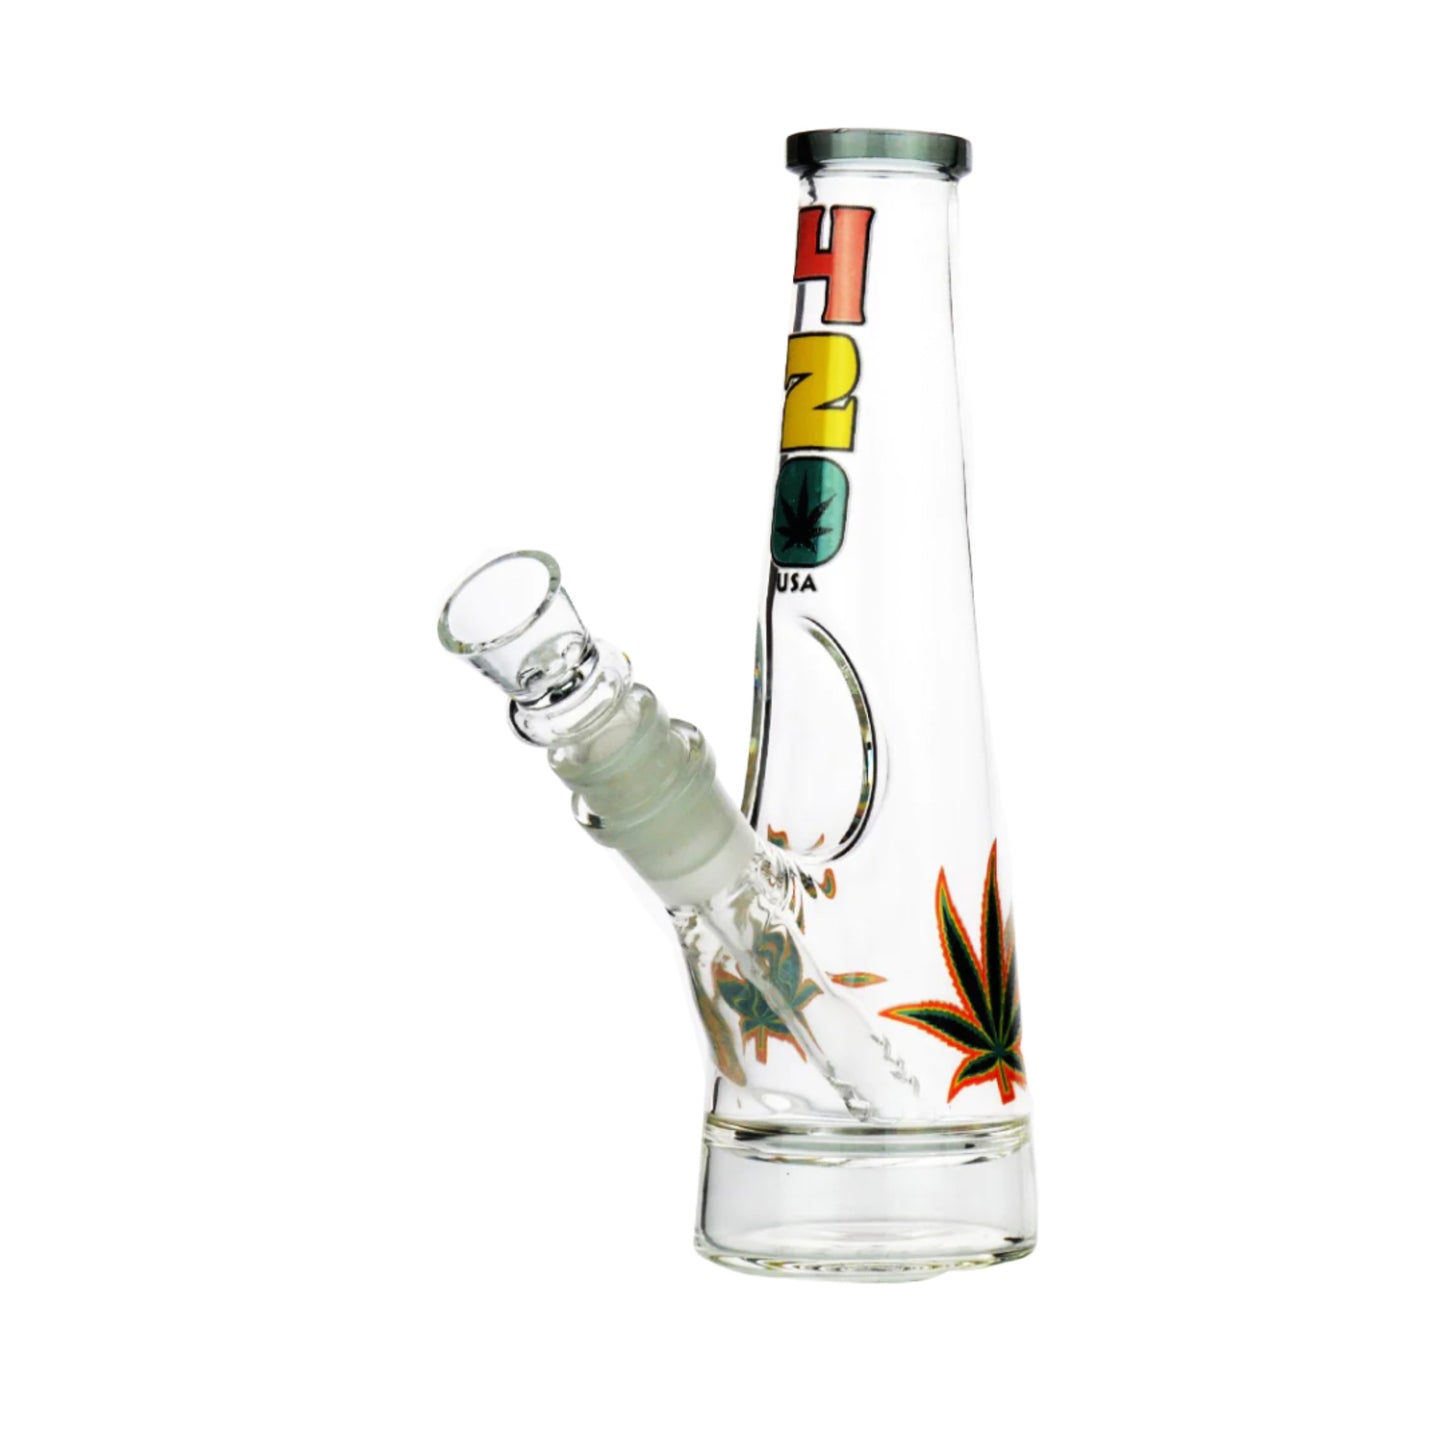 8 Inch 420 Glass Bong with Ice Catcher